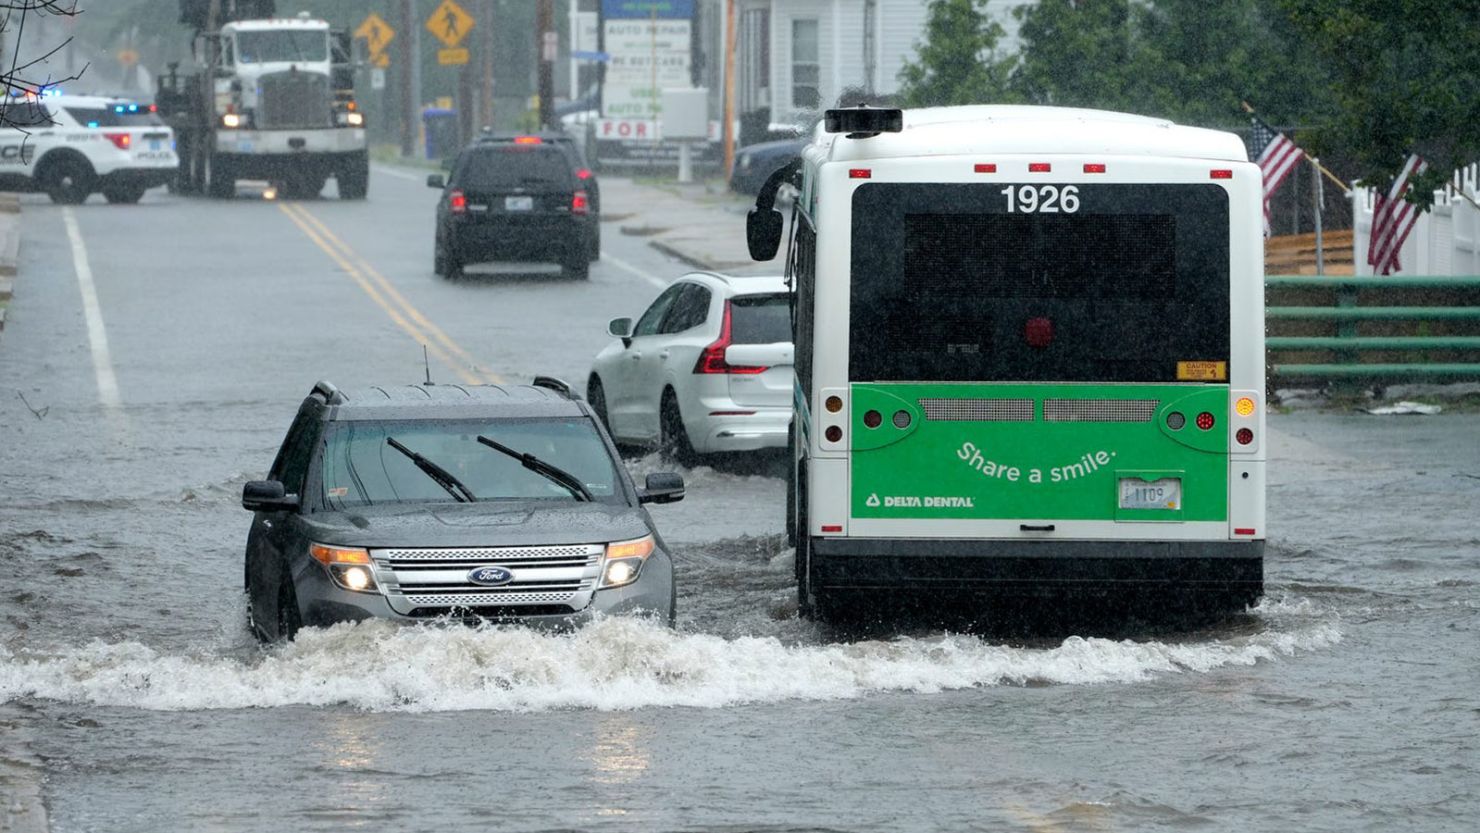 Downpours flood portions of Douglas Ave., in North Providence, Rhode Island, on Monday.